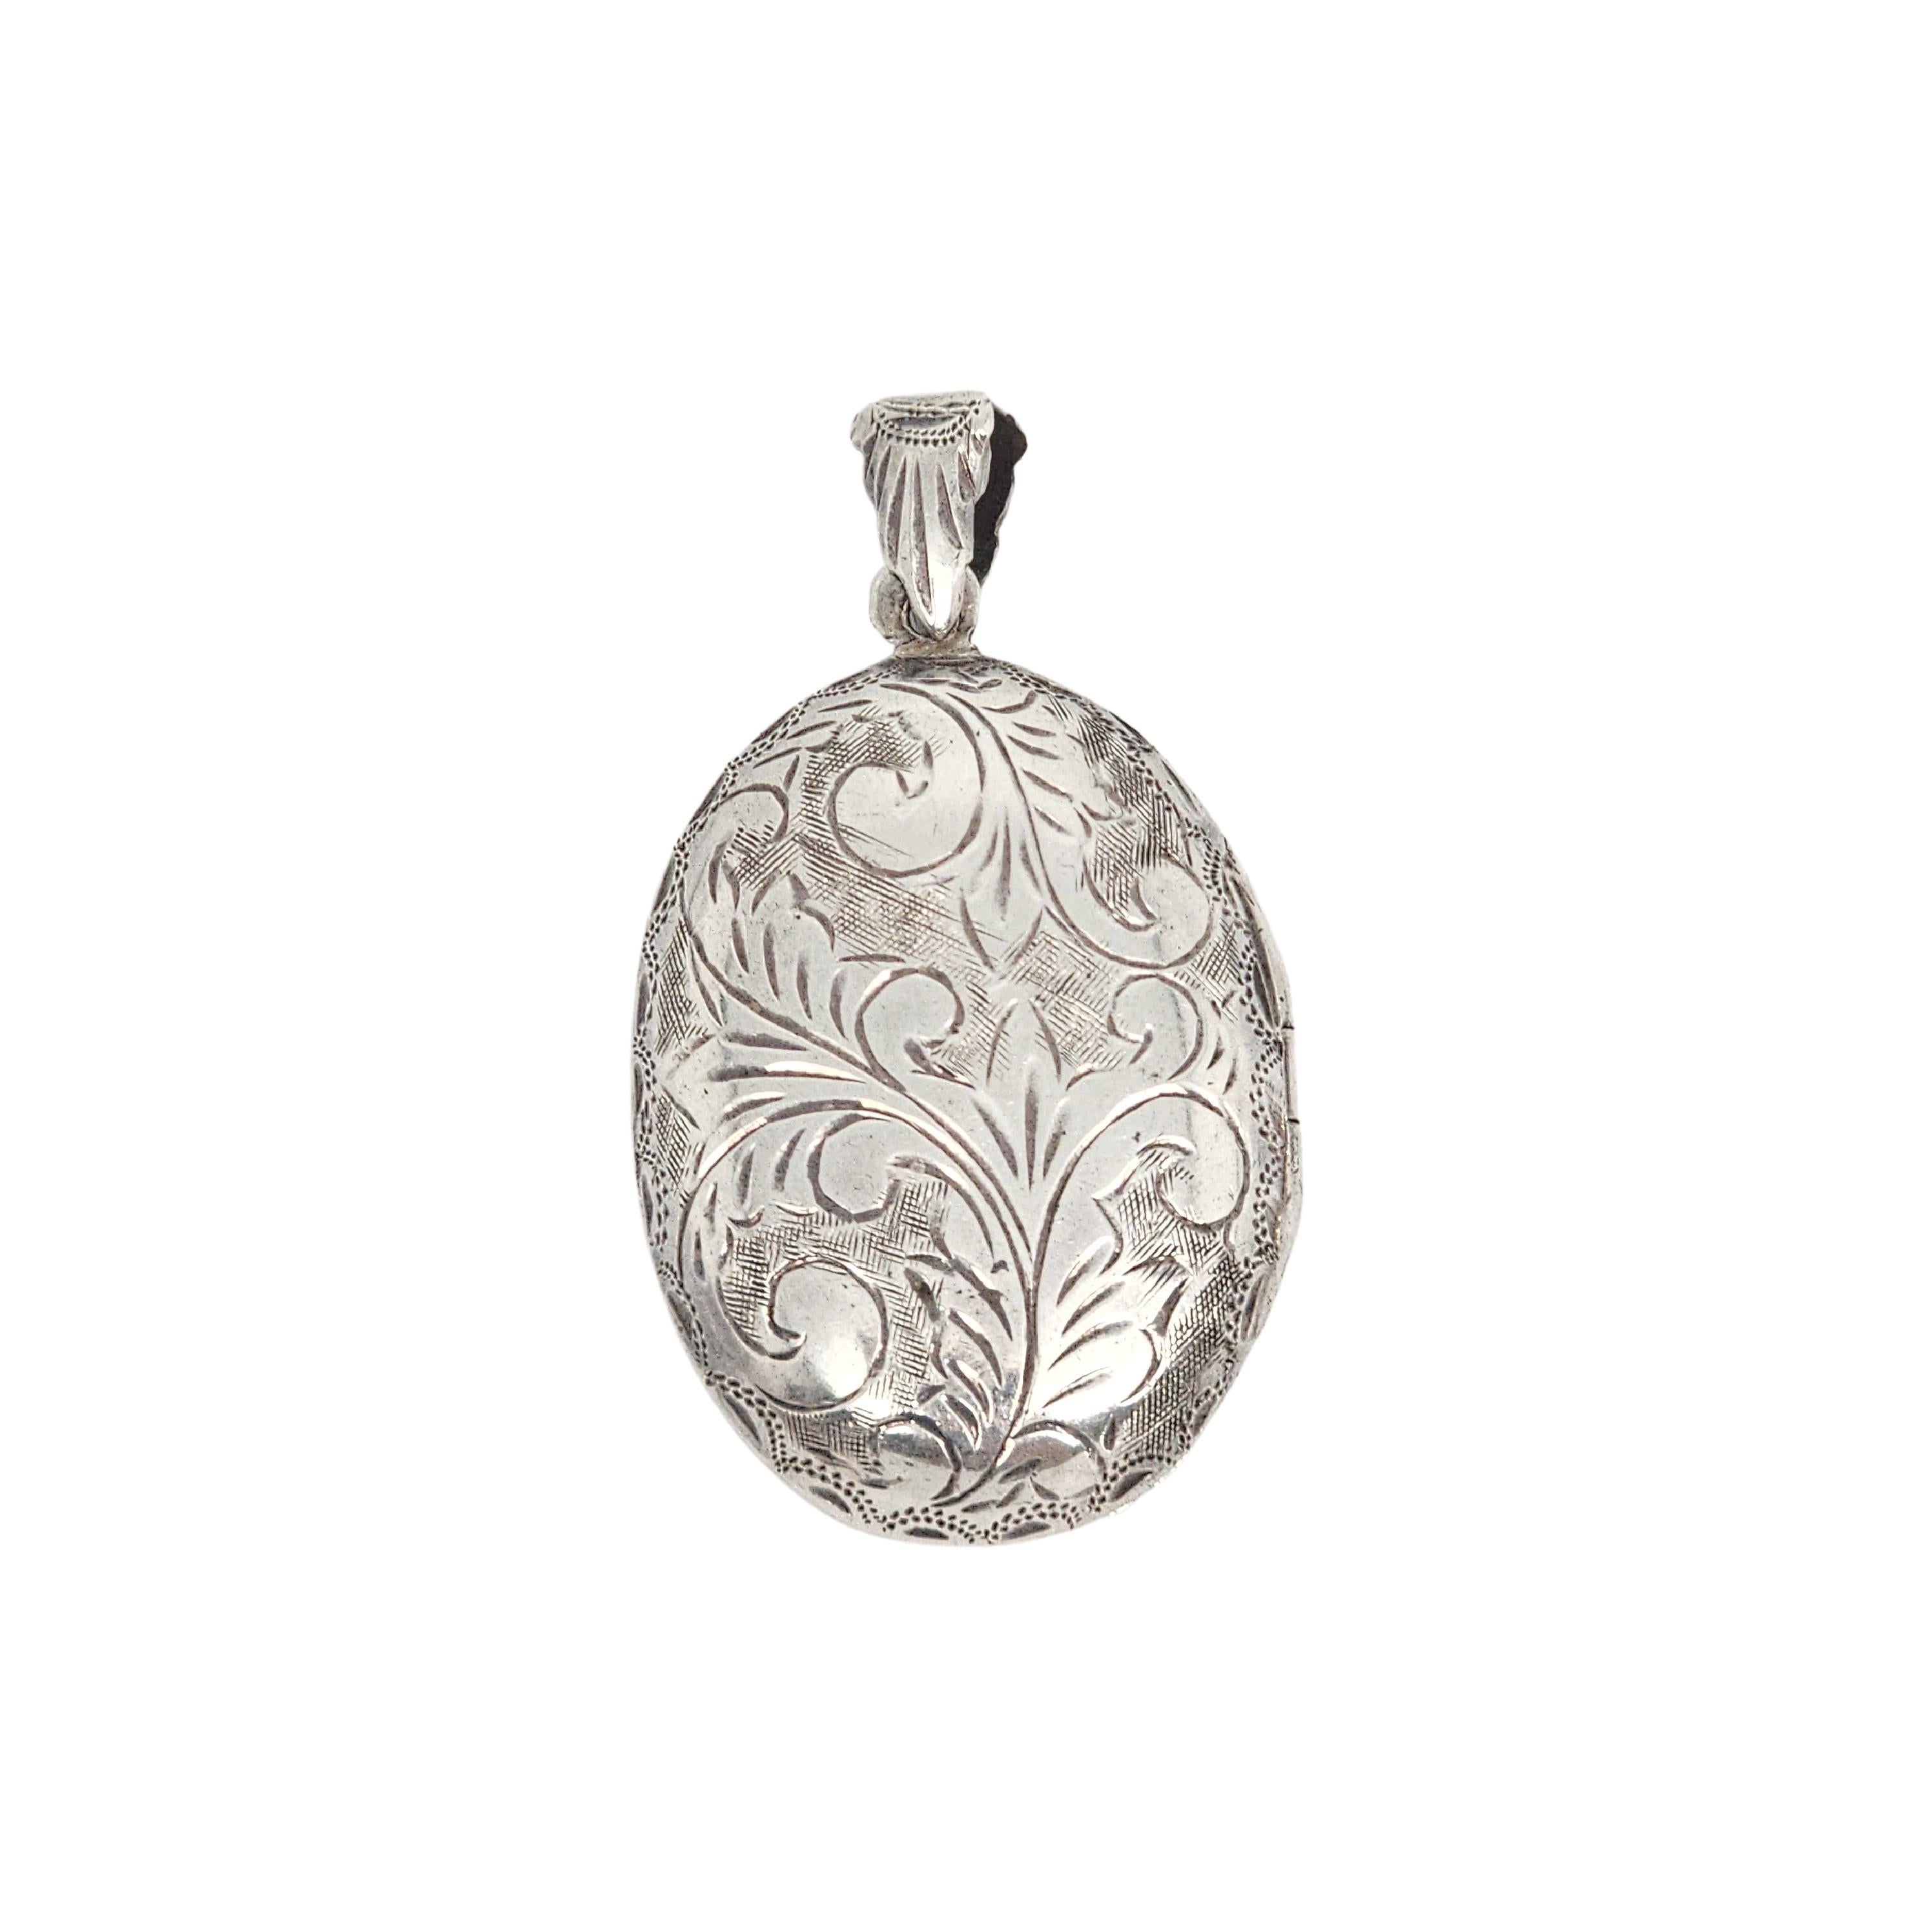 Sterling silver etched oval locket.

Beautiful etched swirl designs on both sides of the locket.

Measures approx 1 3/4